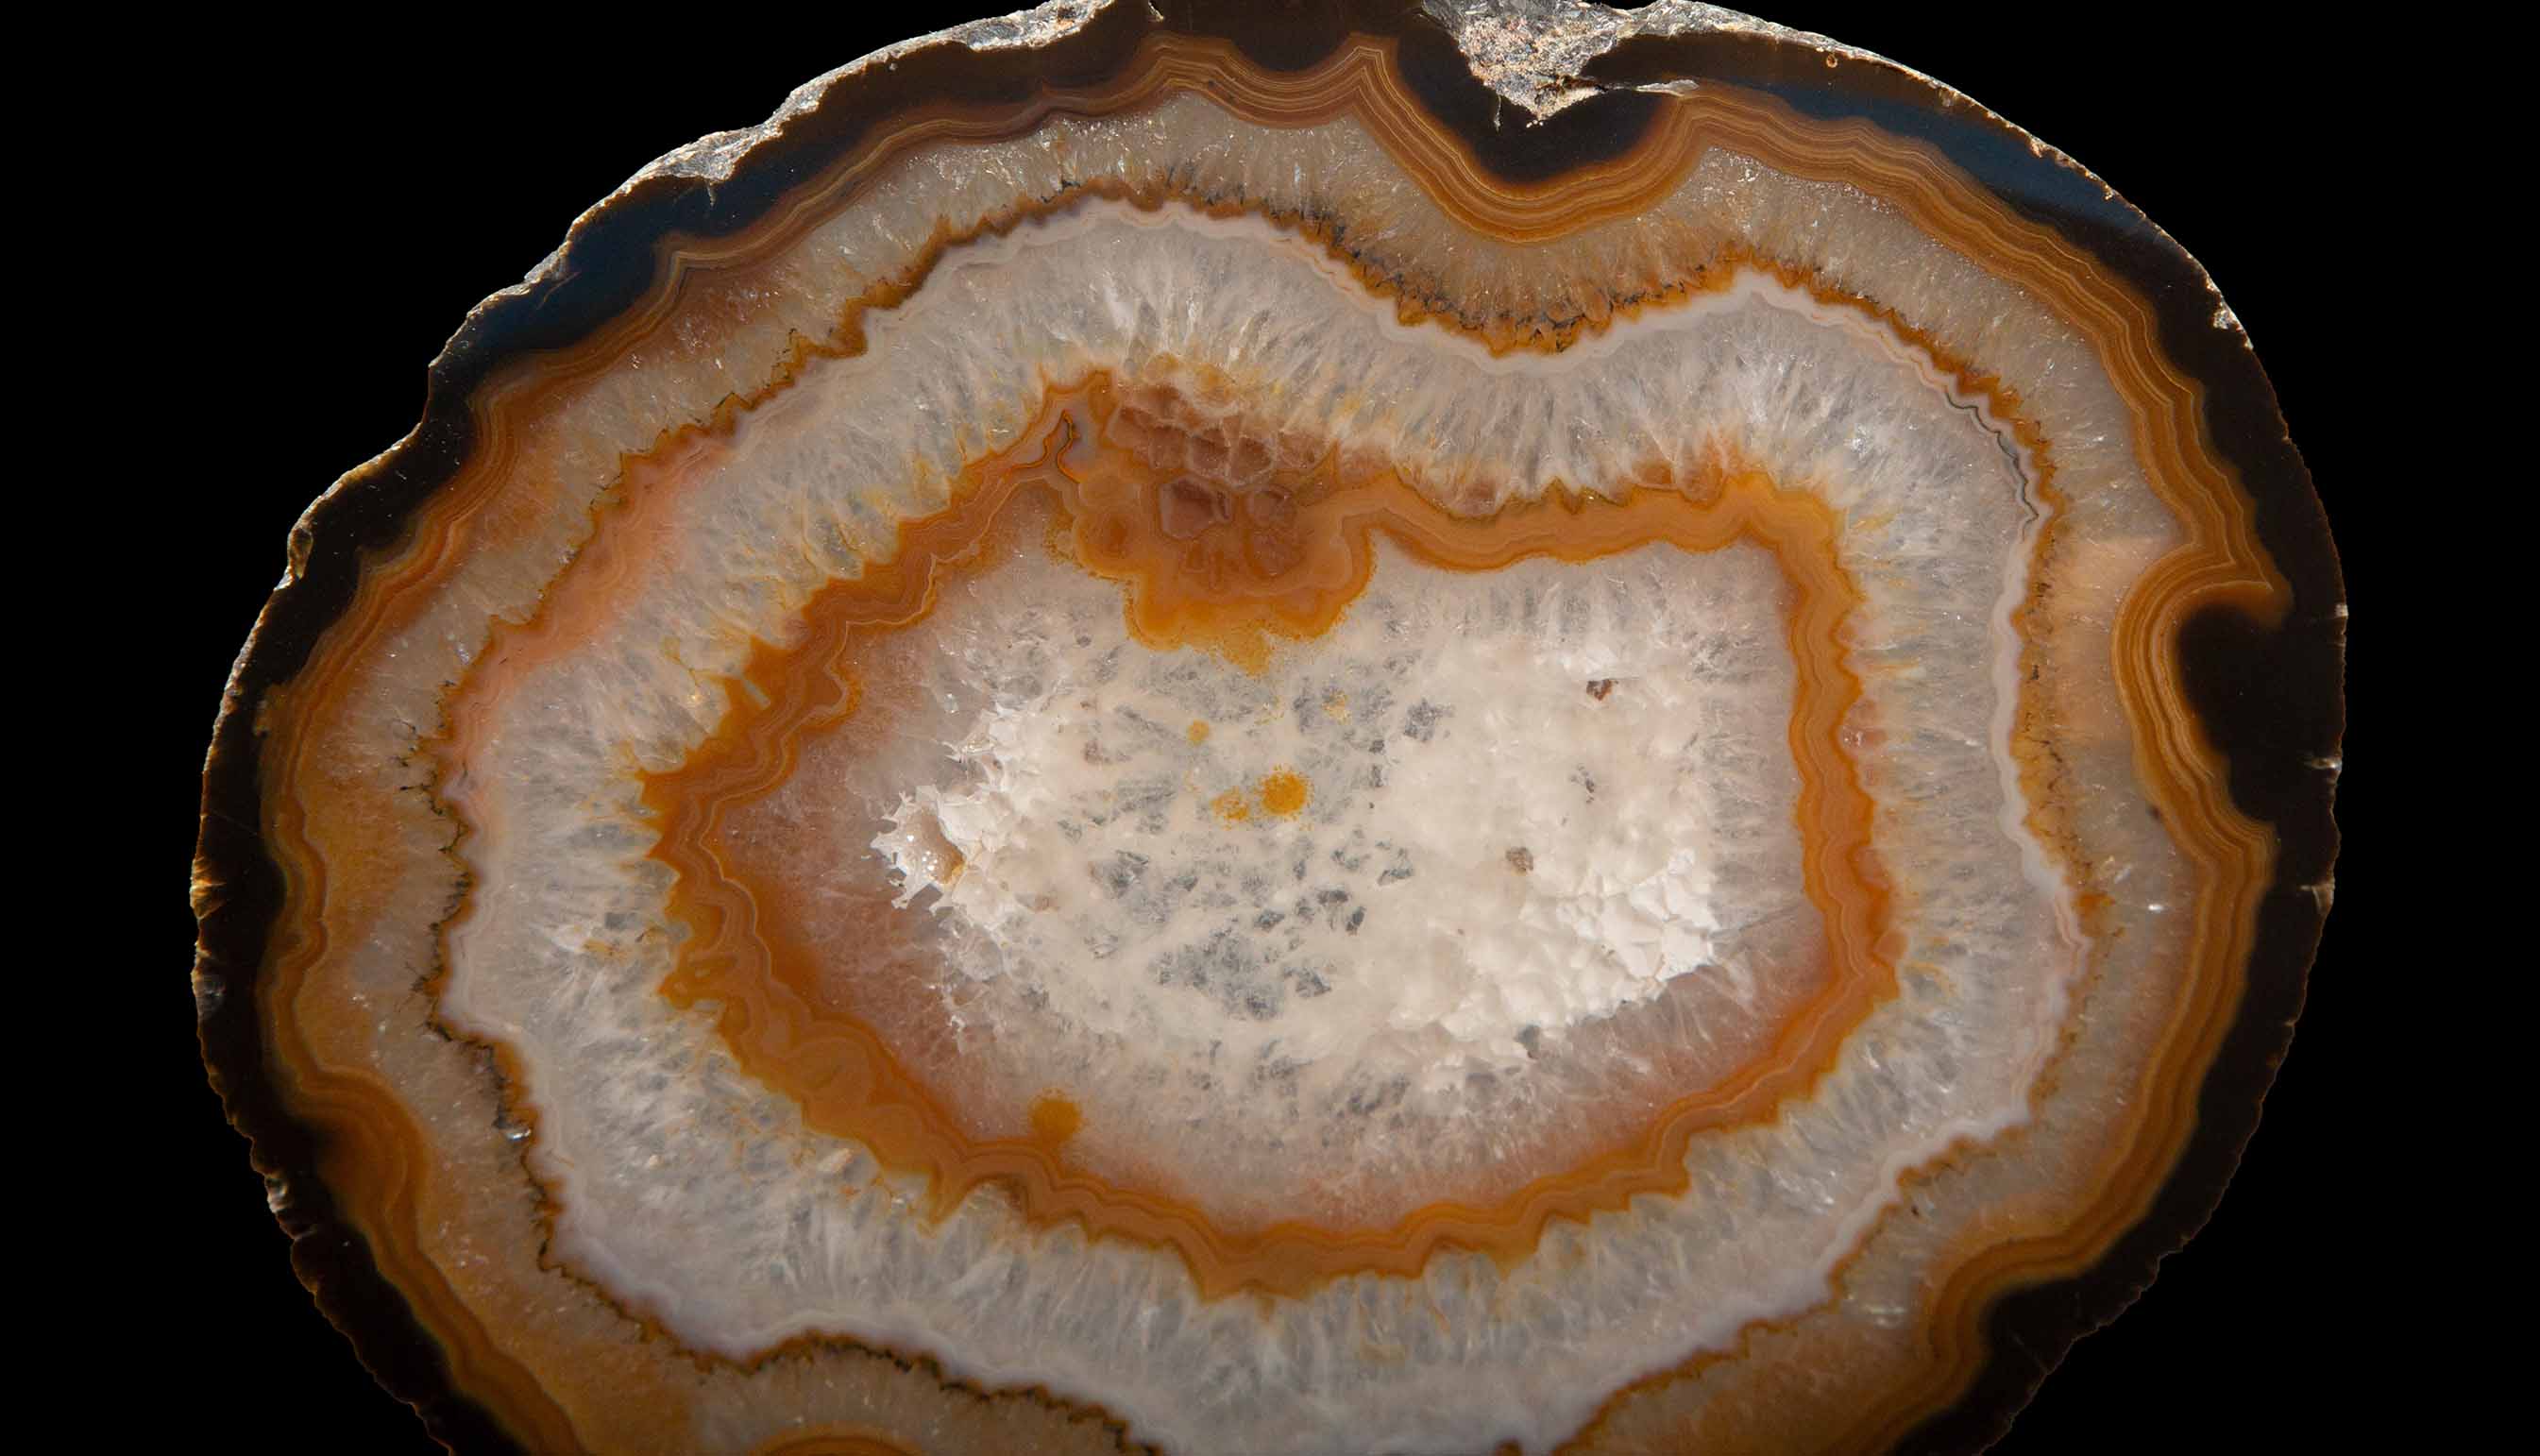 Small Mounted Agate Slice